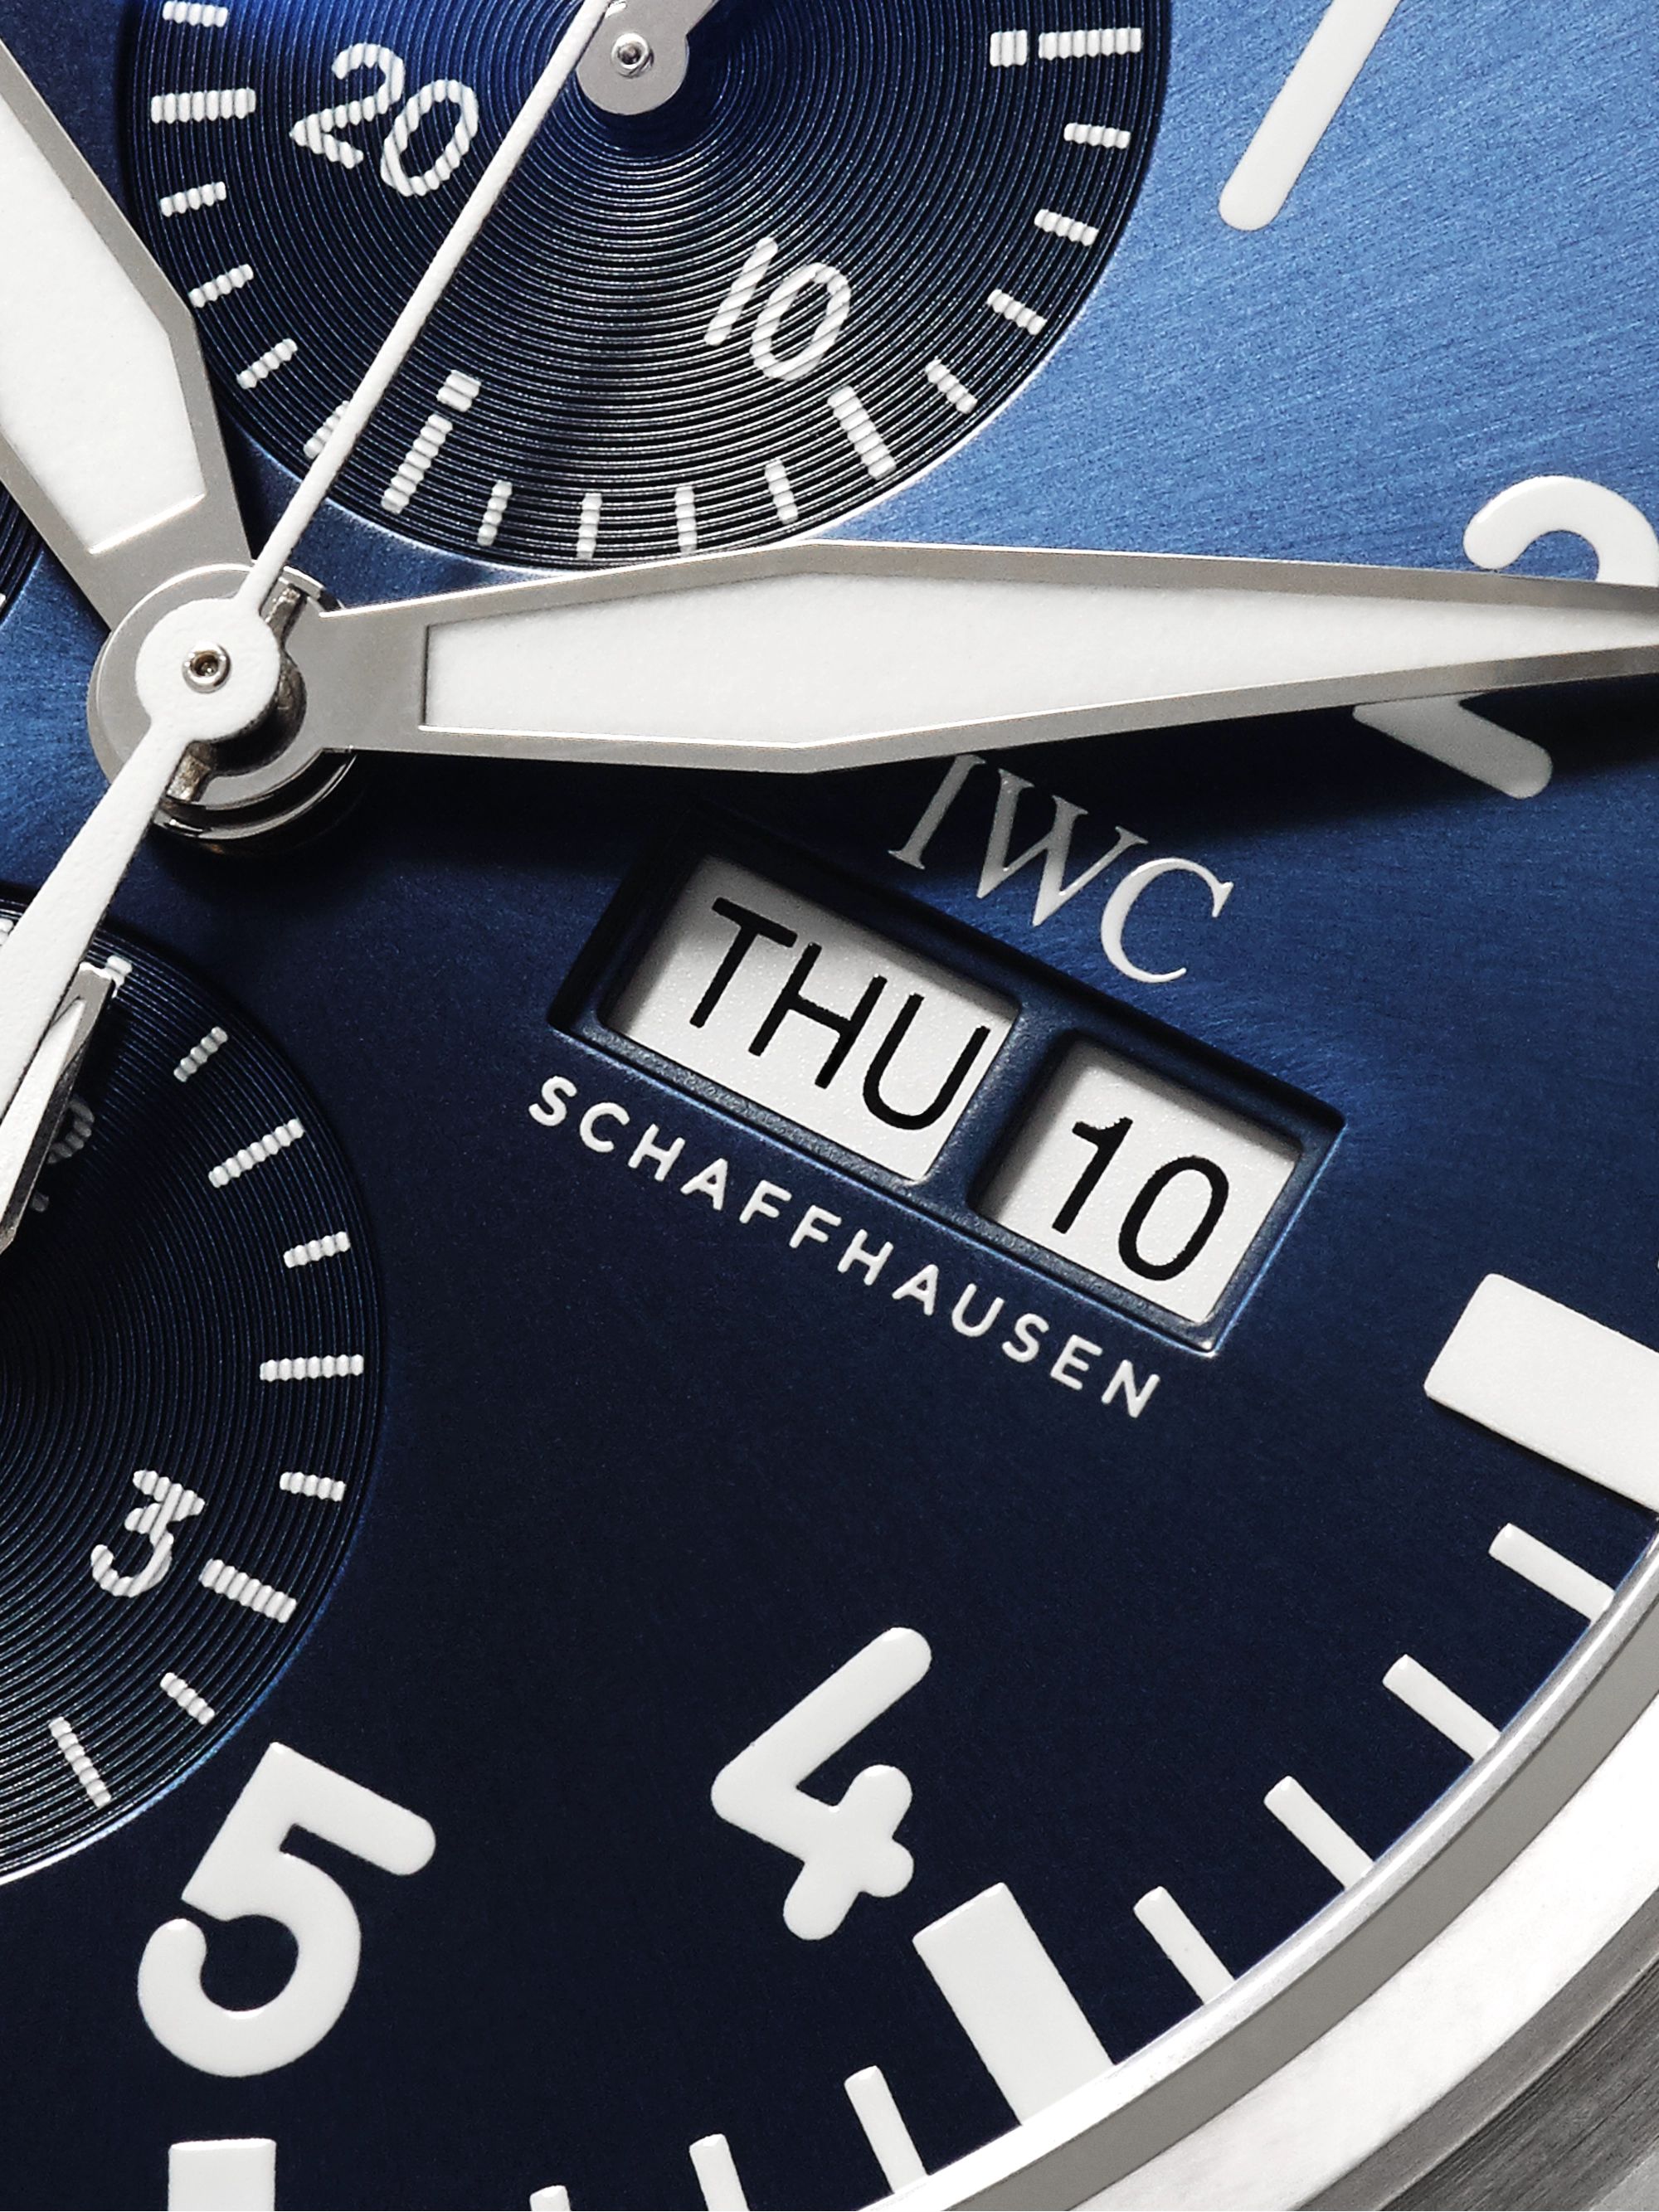 IWC SCHAFFHAUSEN Pilot's Le Petit Prince Edition Chronograph 43mm Stainless Steel Watch, Ref. No. IW377717